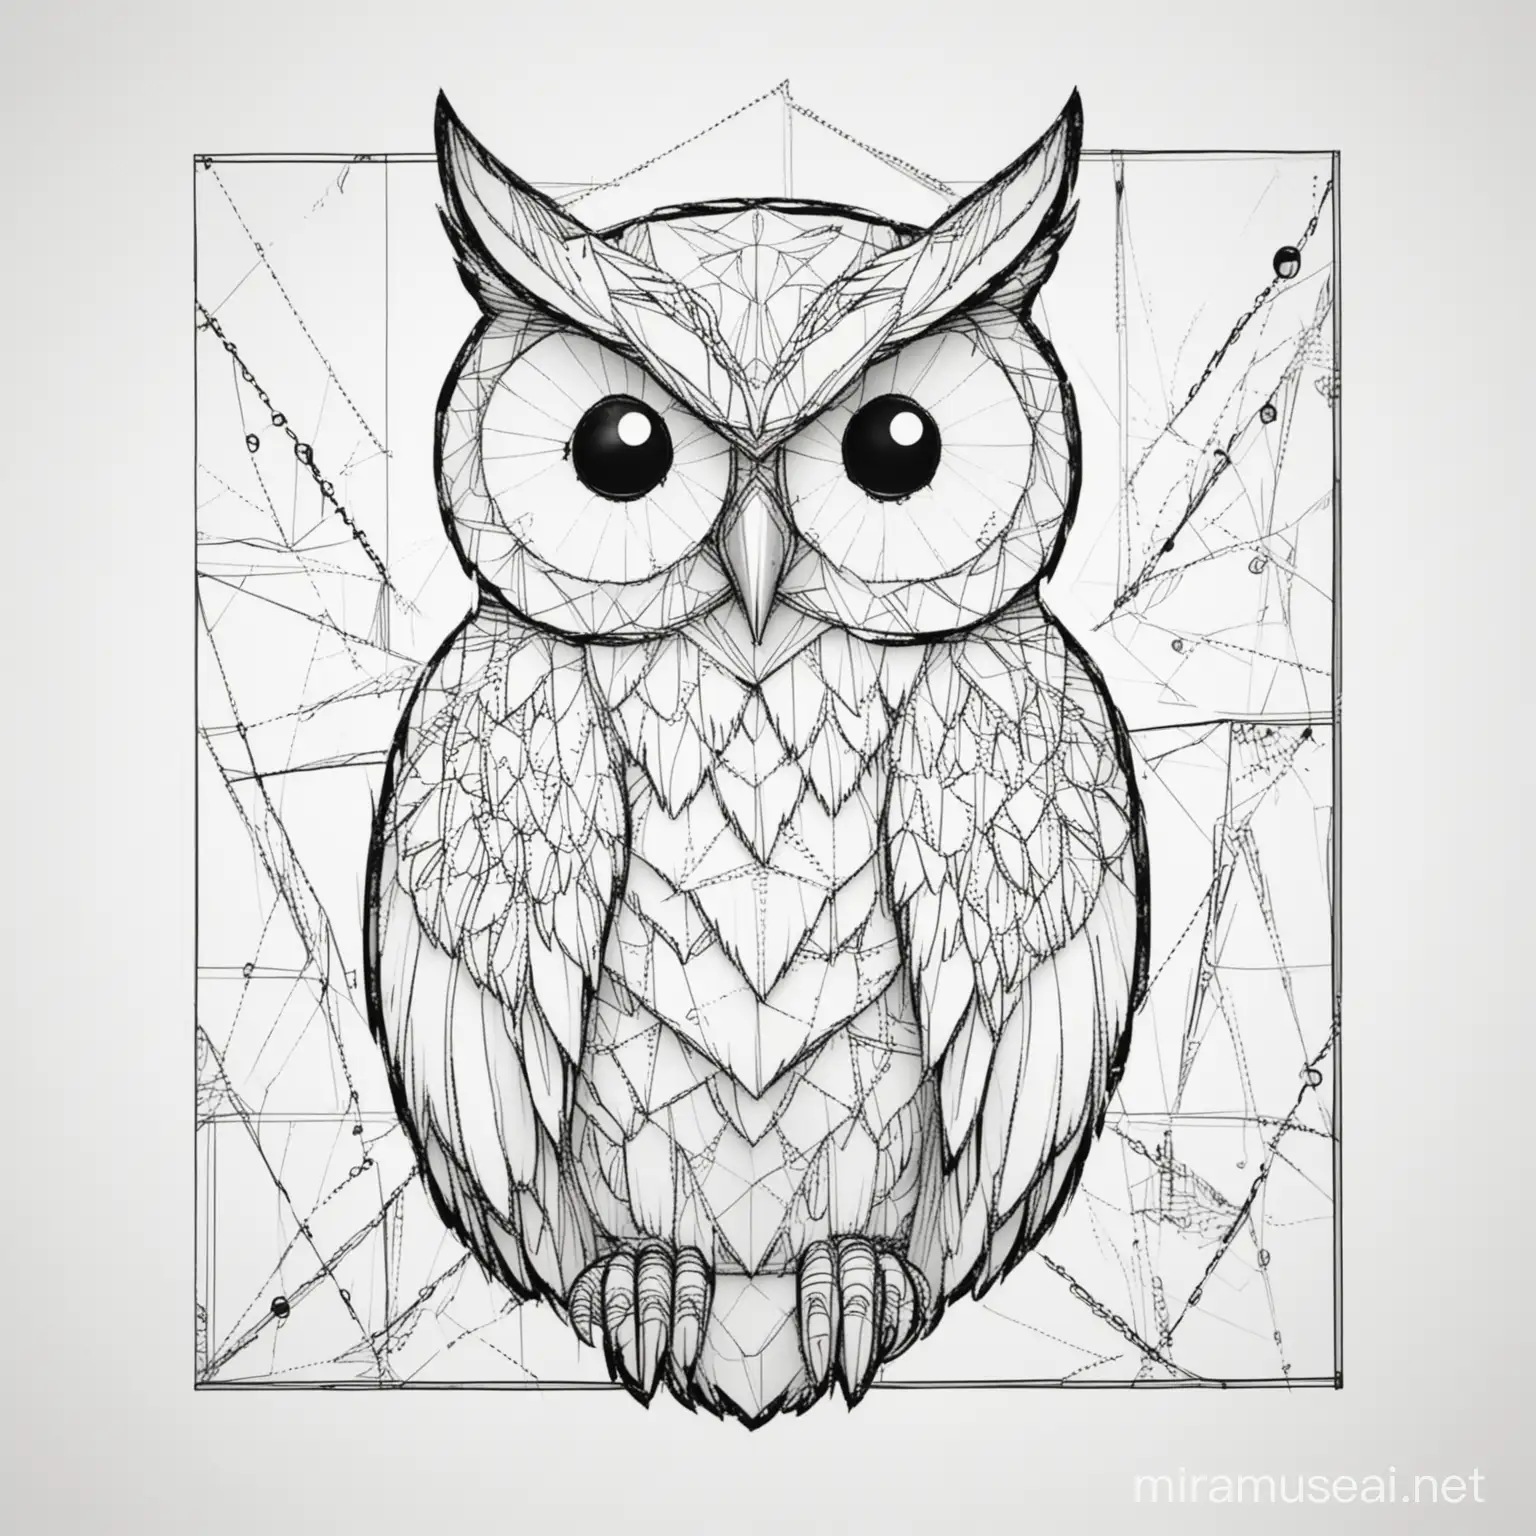 Create a colouring page of An owl
,use geometric figures,black and white, in the style abstract minimalism, white background geometric,simple colouring page, for children's colouring book